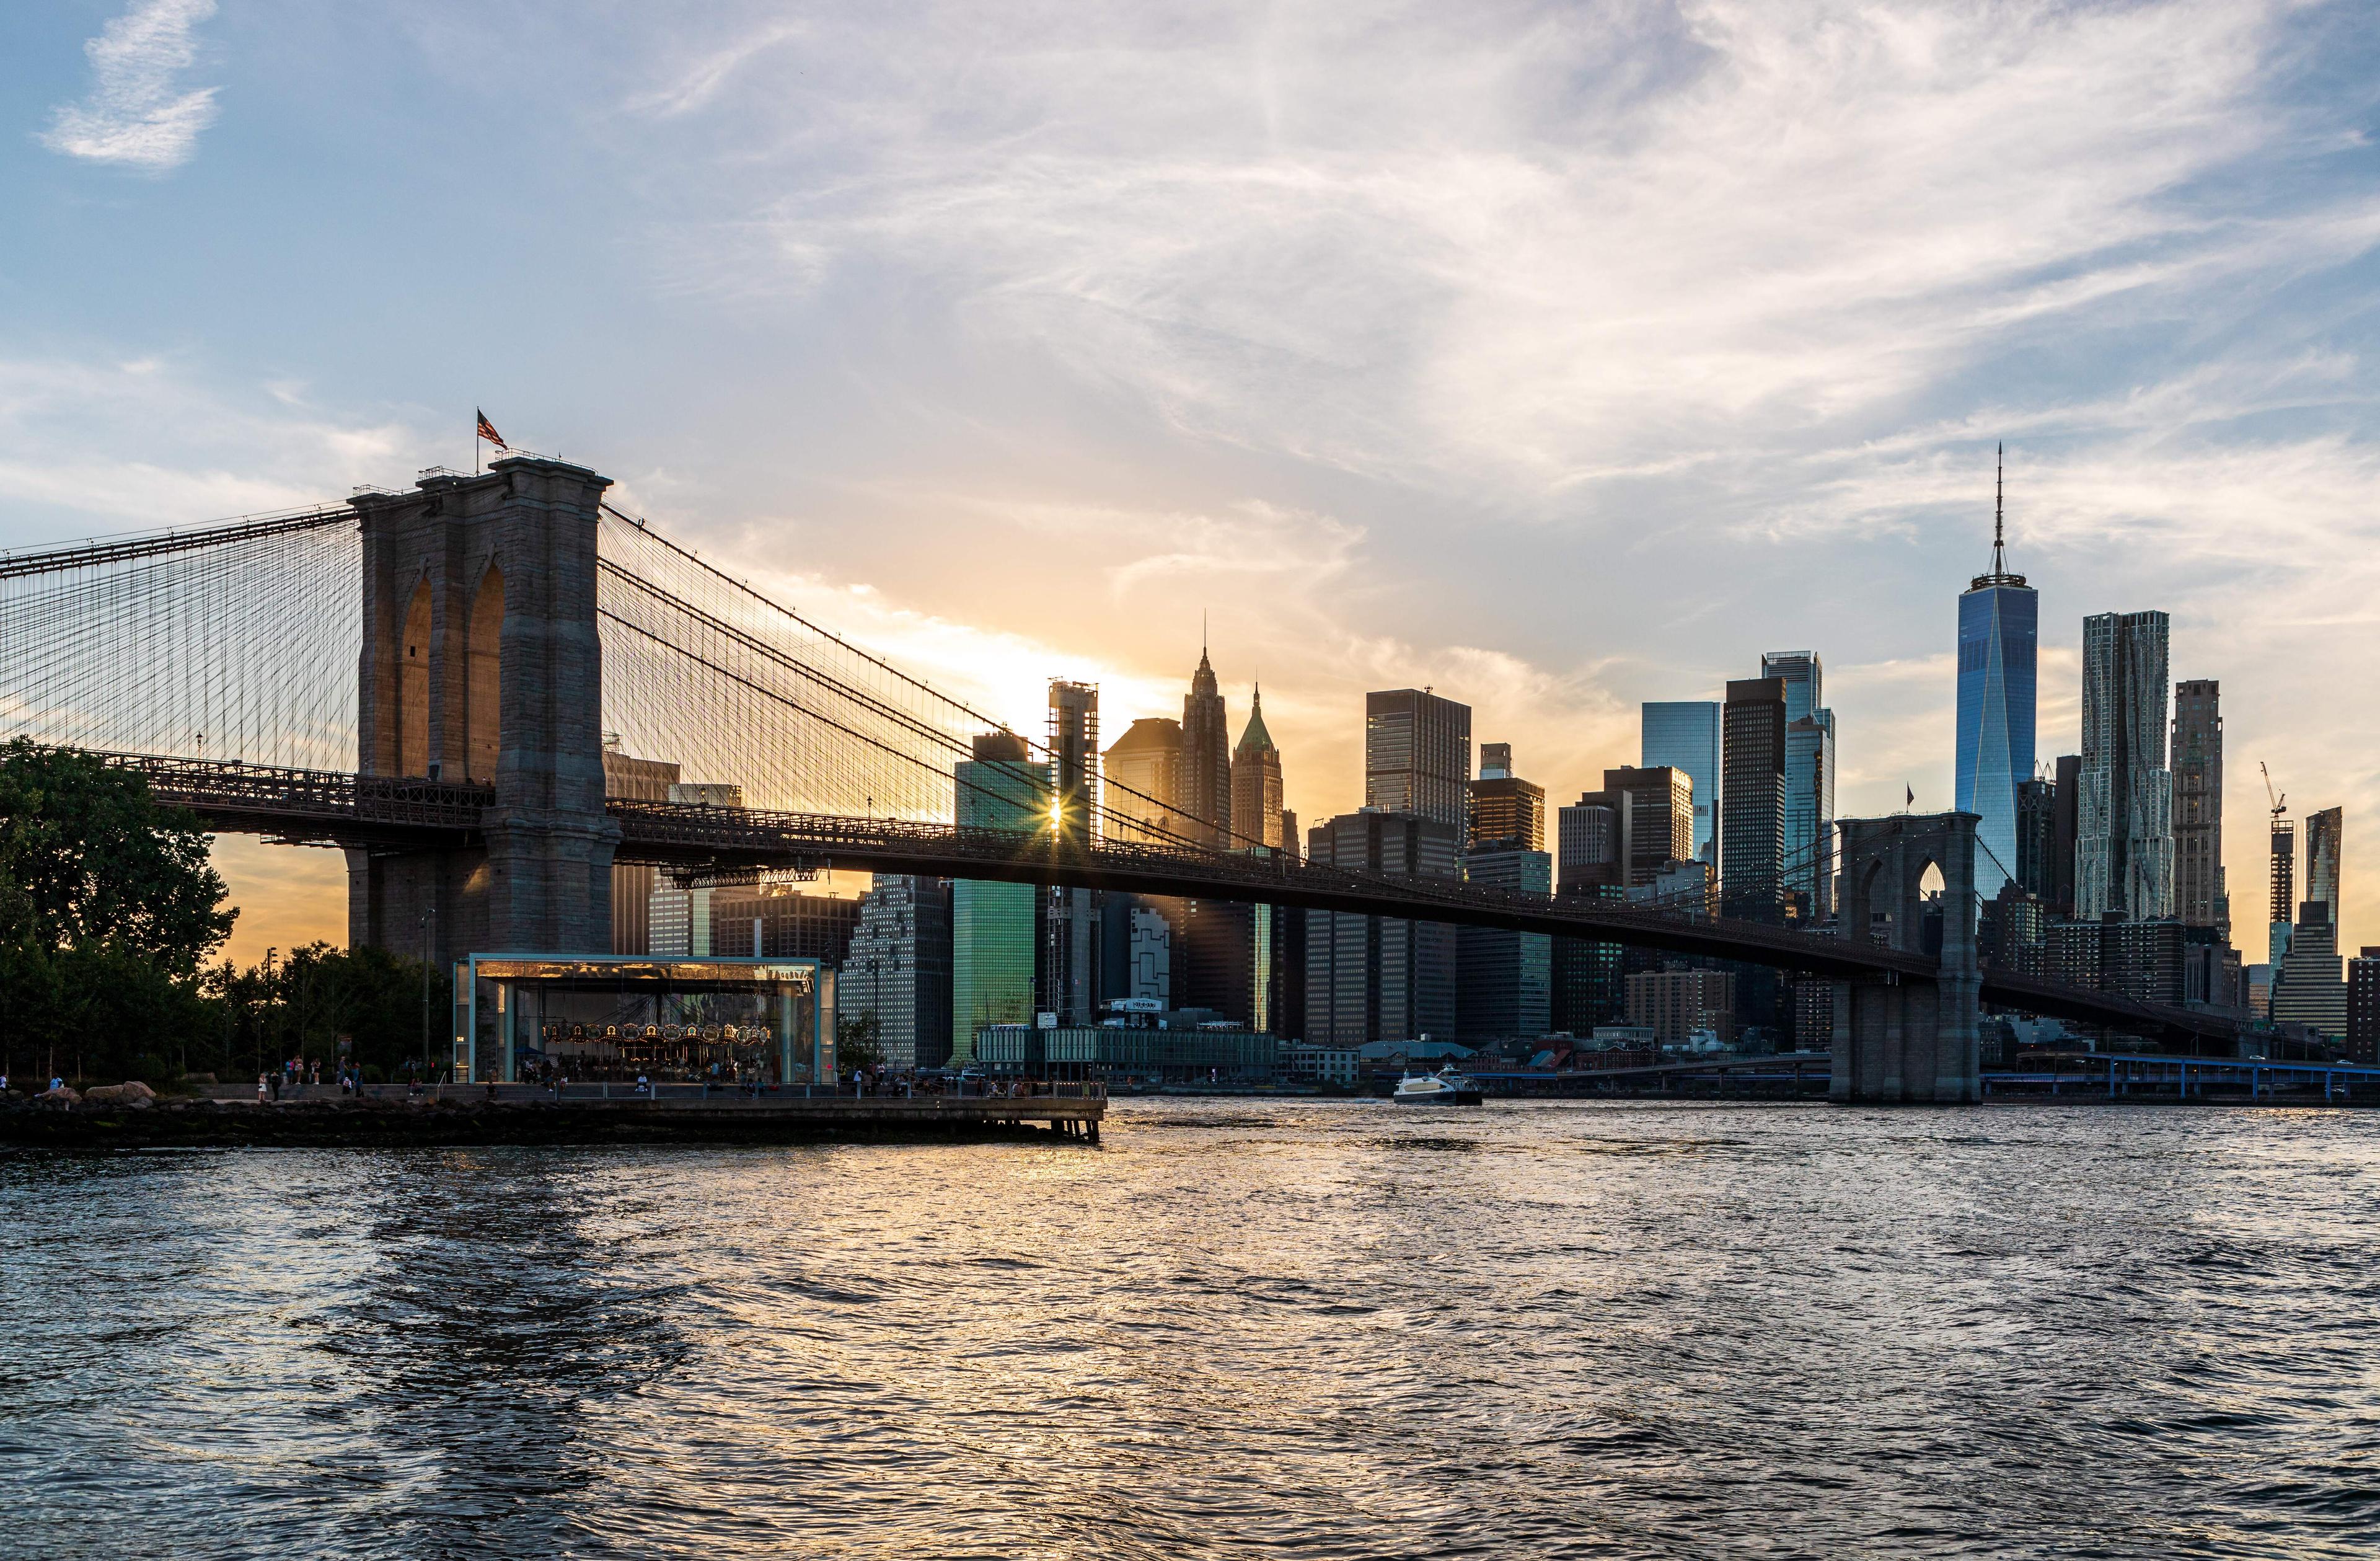 impacts of tourism in new york